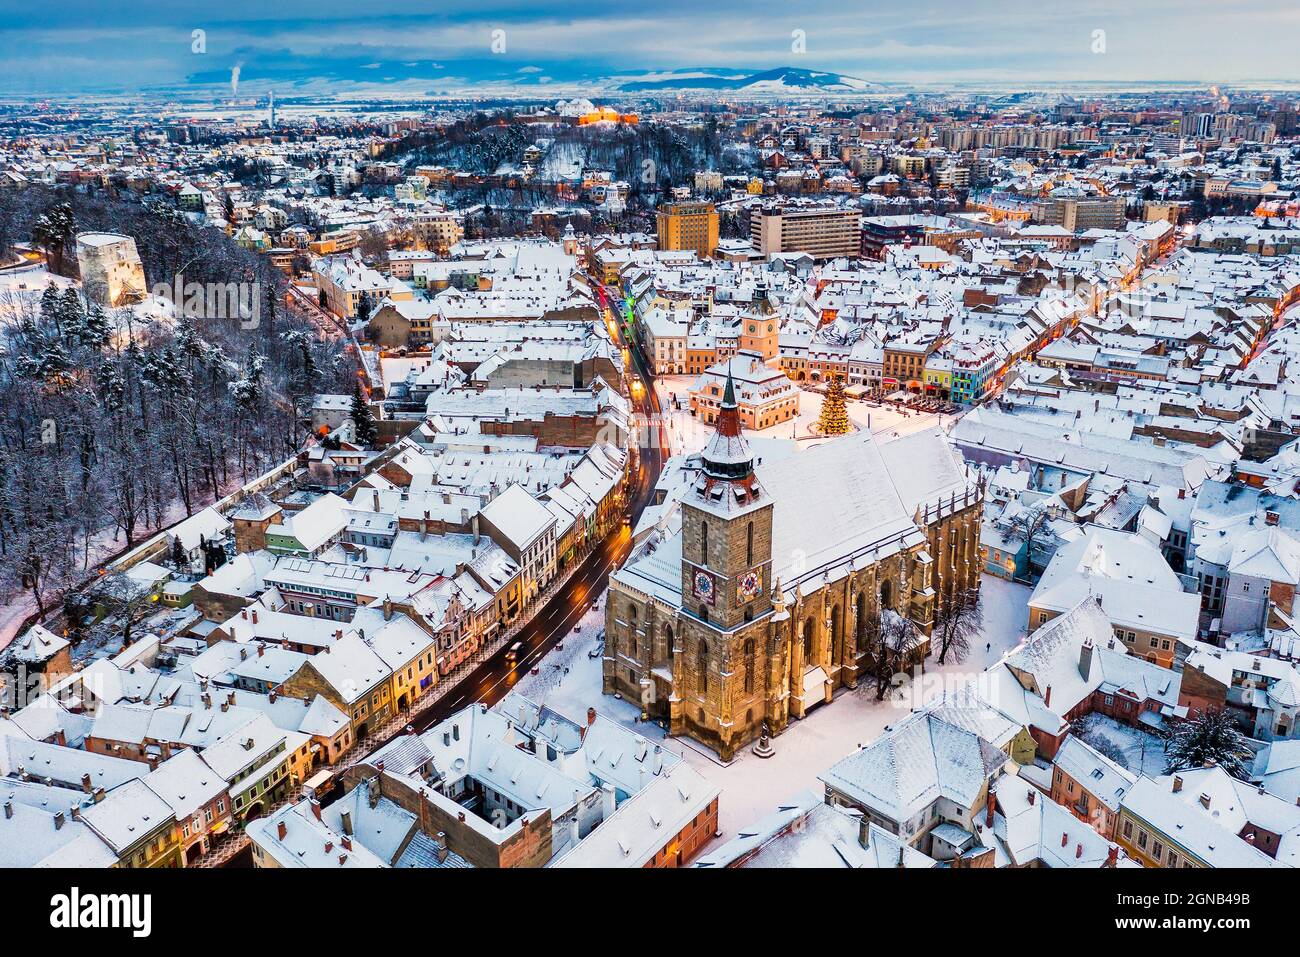 Brasov, Romania. Aerial view of the old town during Christmas. Stock Photo